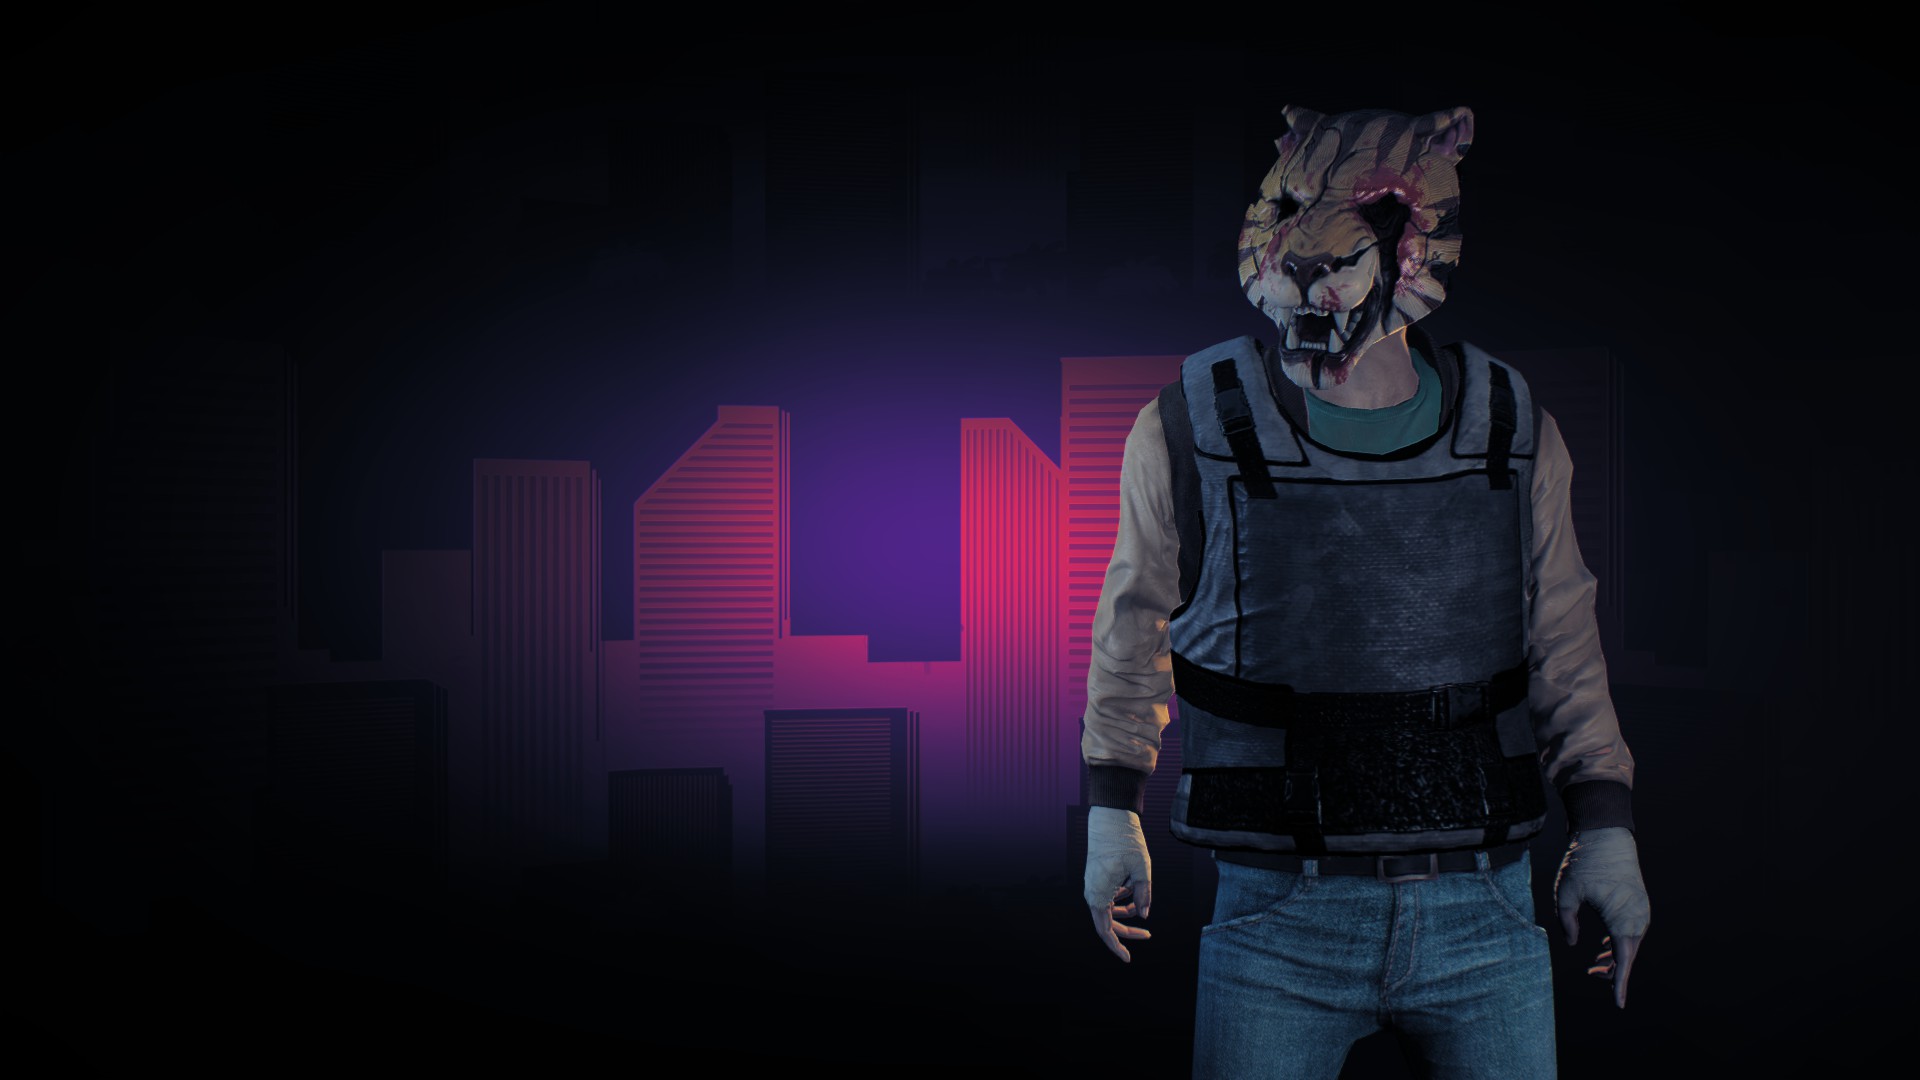 The jacket payday 2 фото 85